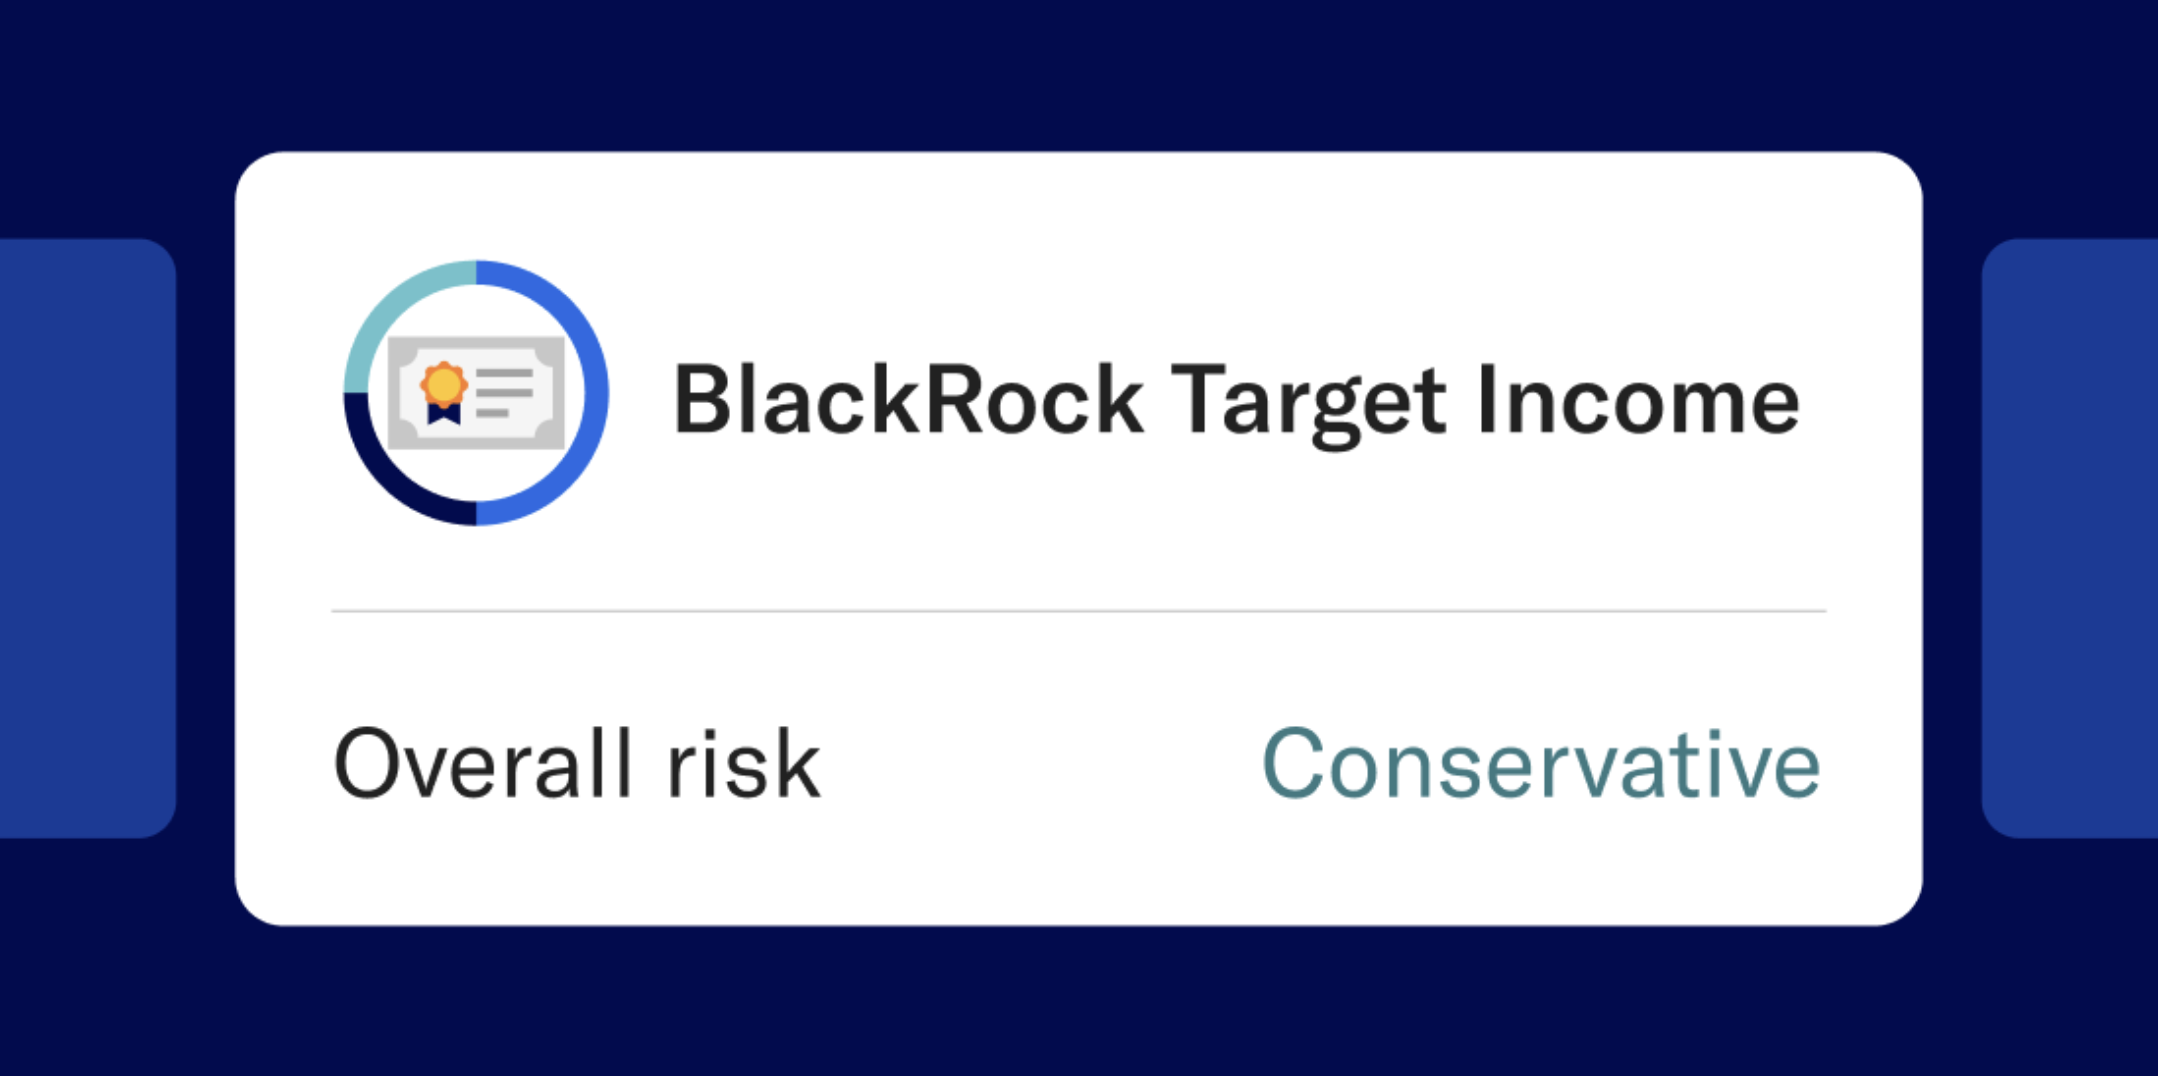 Blackrock Target Income showing an Overall conservative Risk 